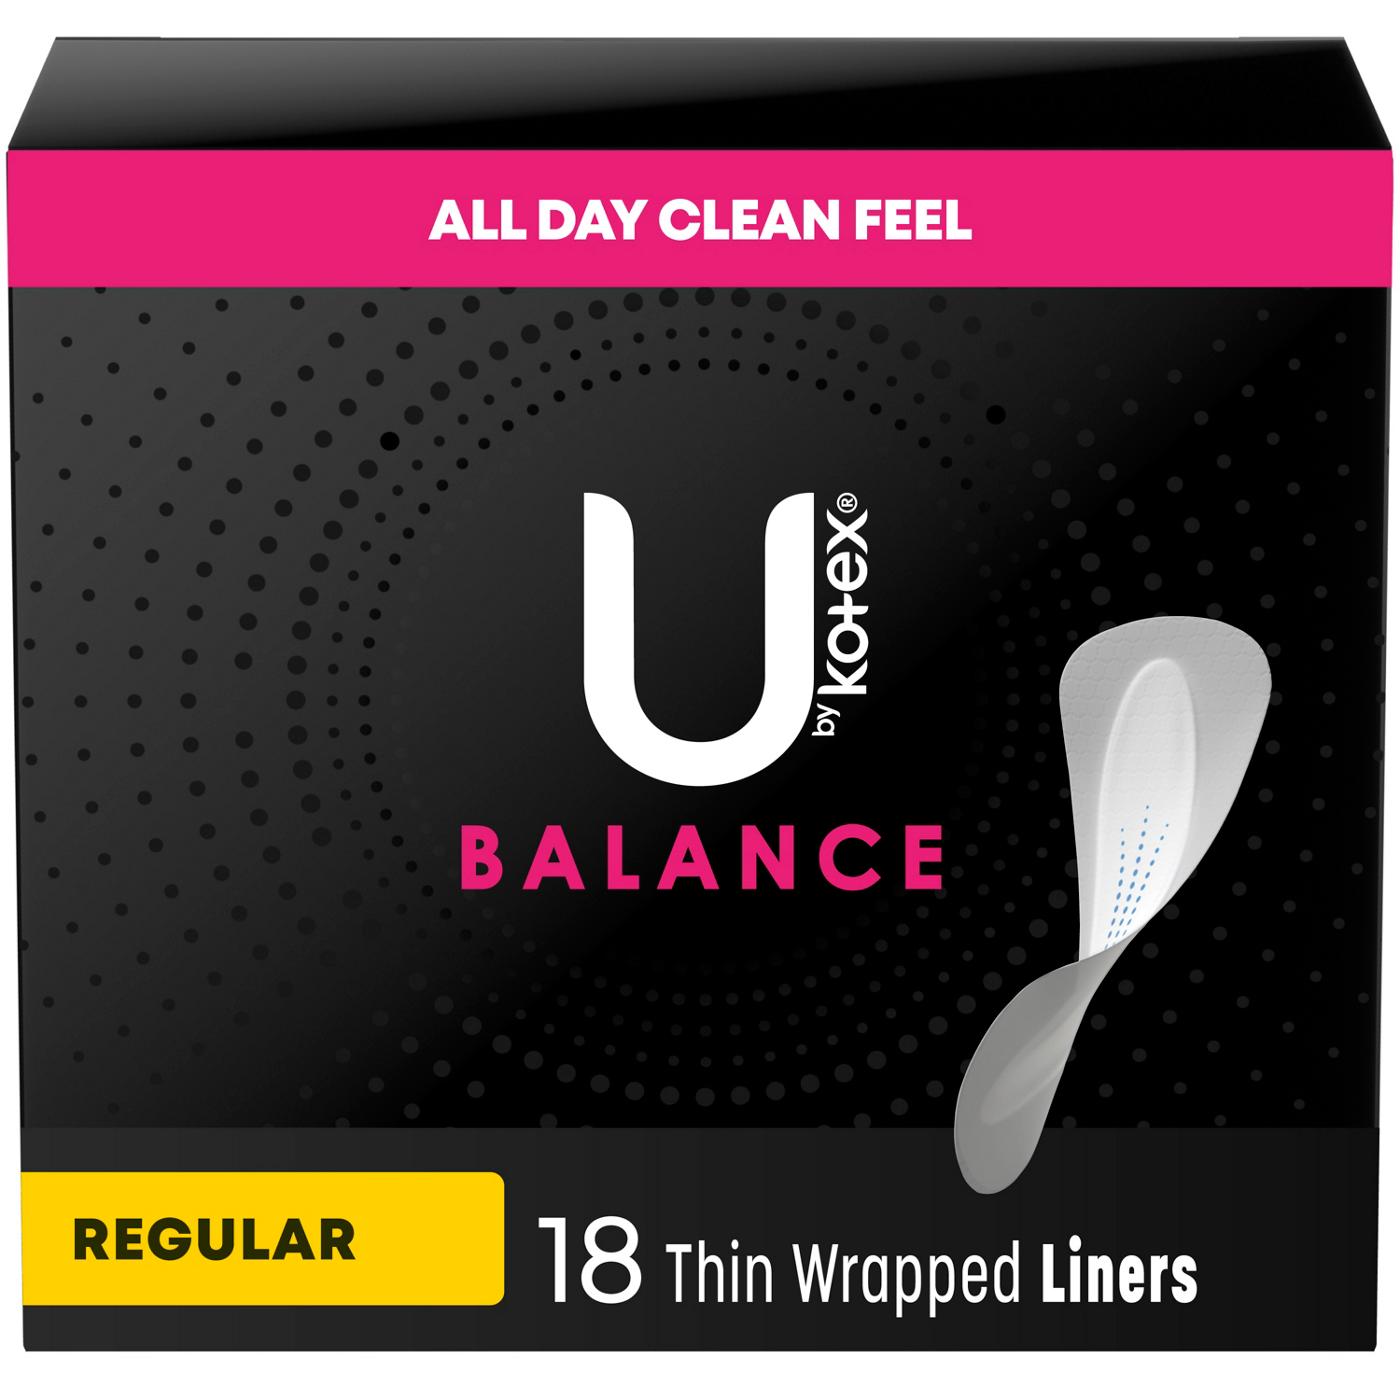 U by Kotex Balance Daily Wrapped Panty Liners - Light Absorbency - Regular Length; image 1 of 5